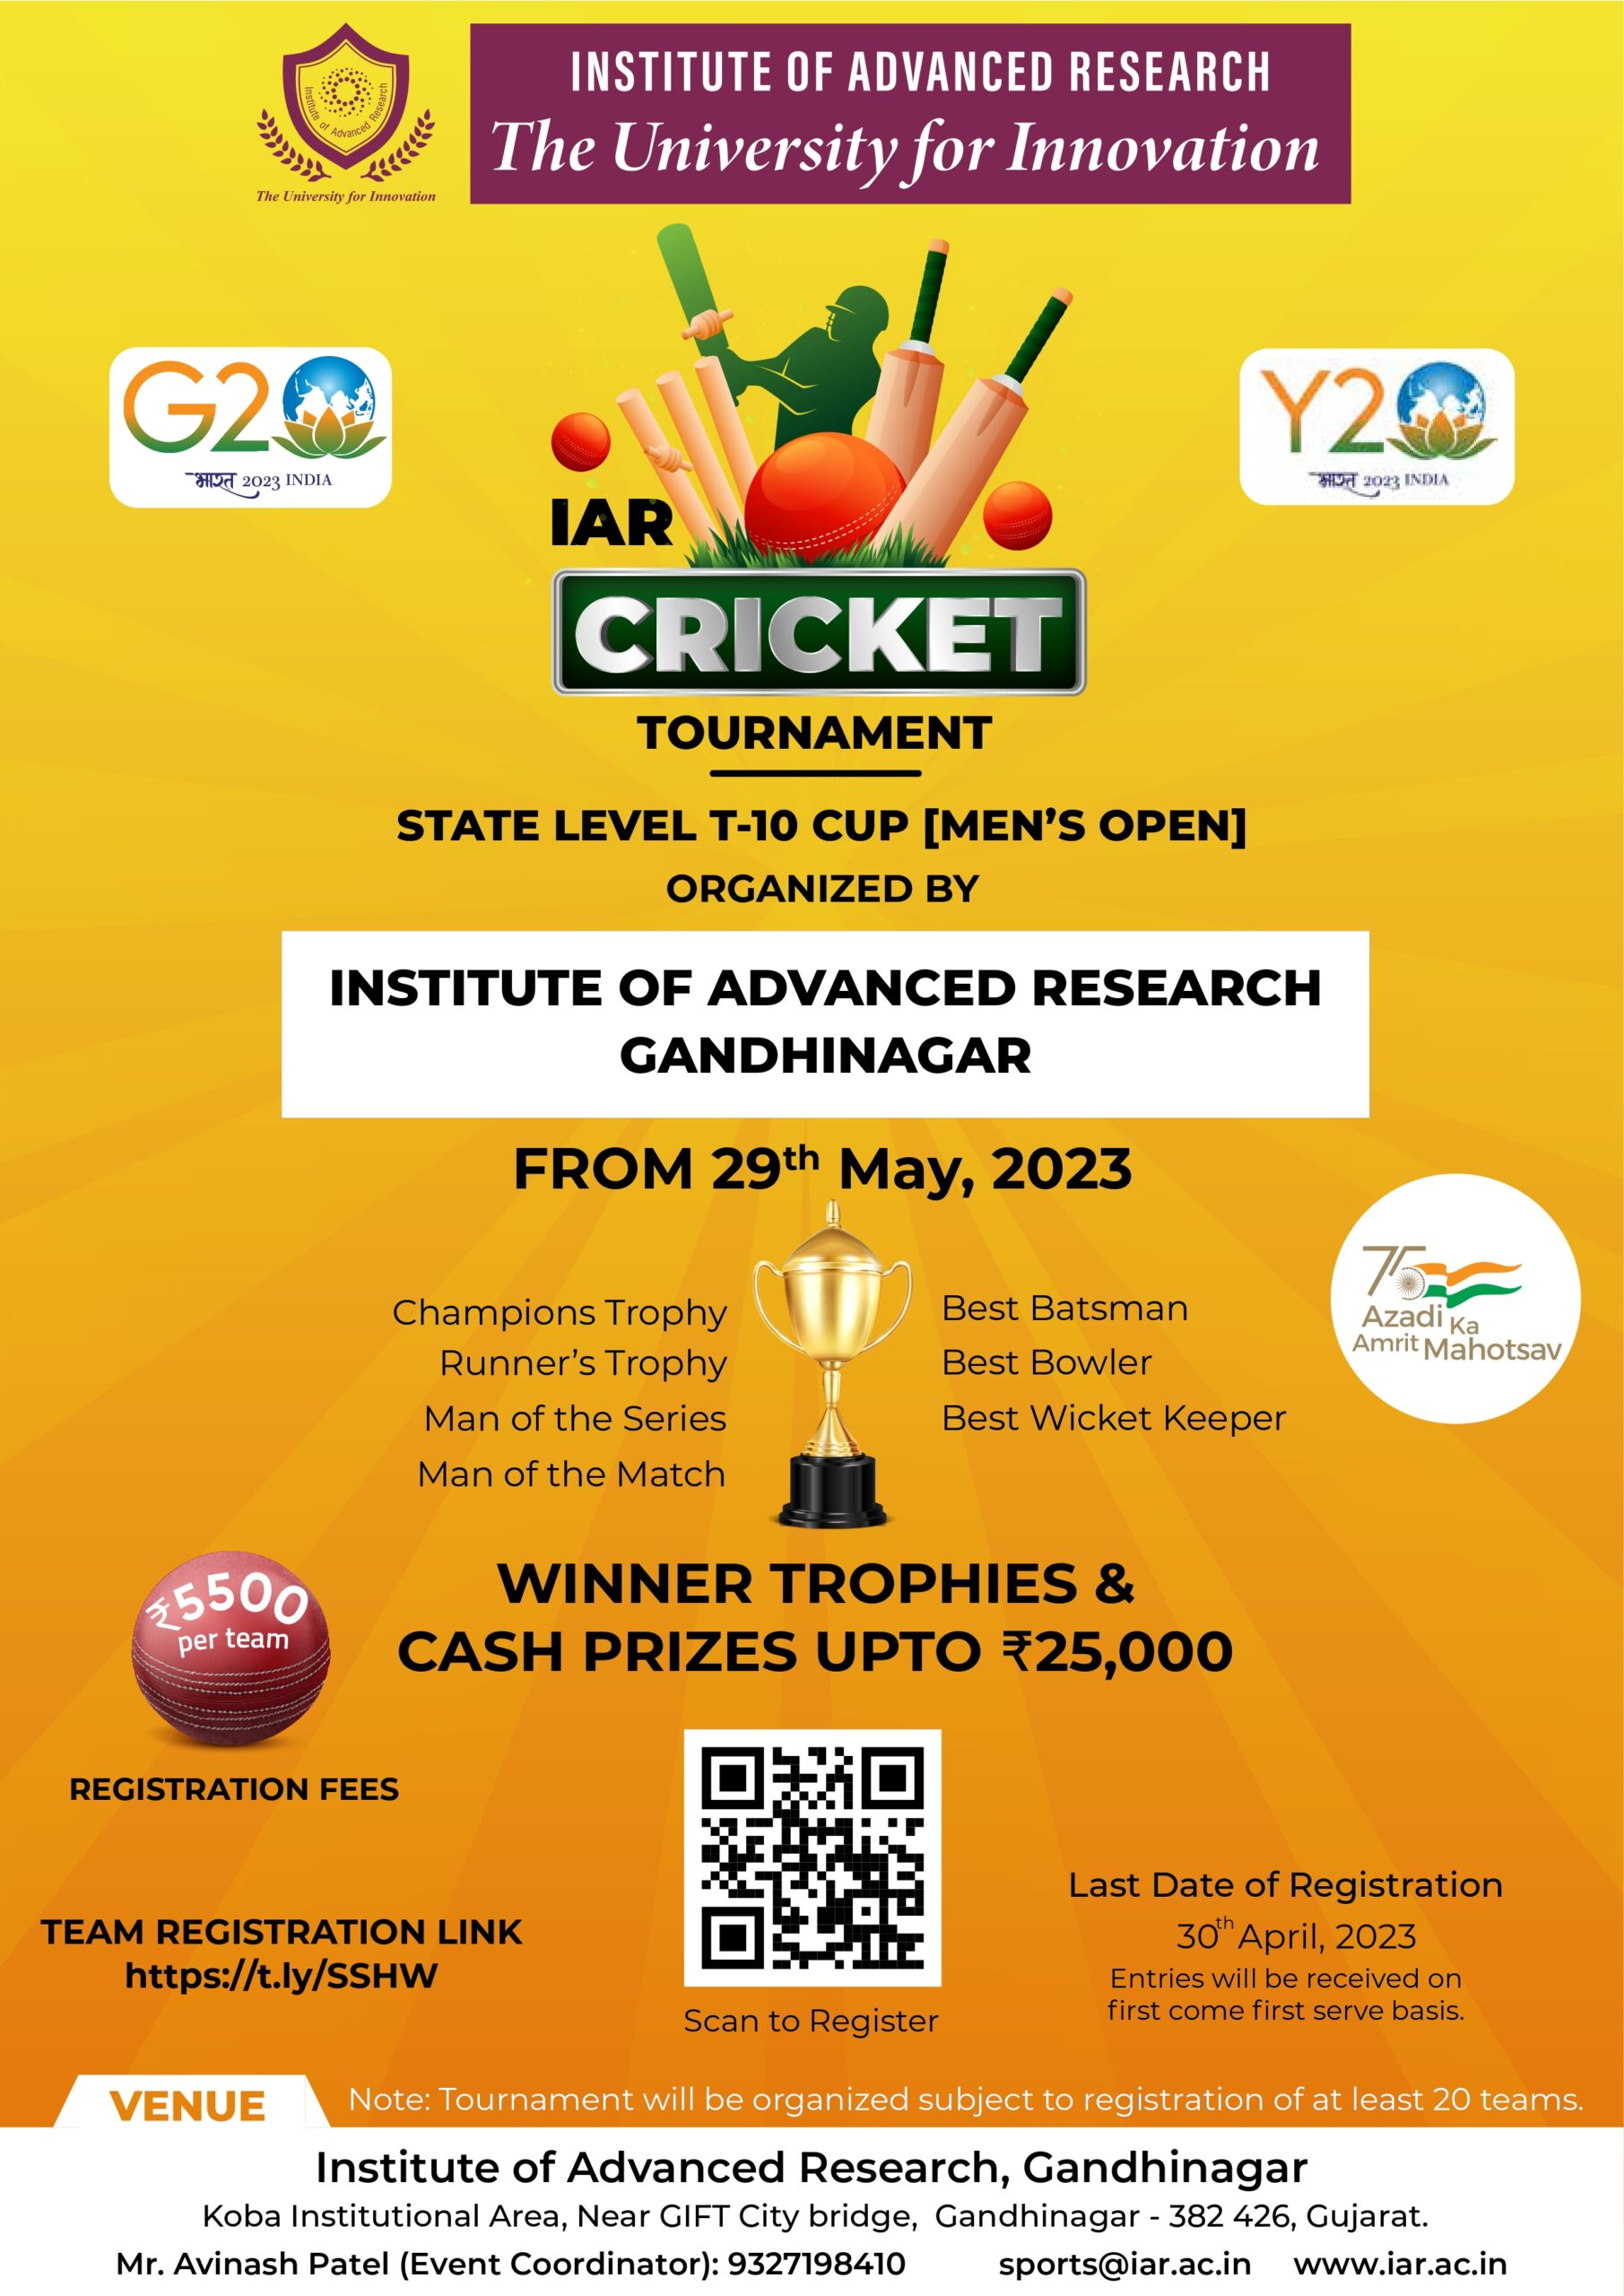 State Level Cricket Tournament “STATE LEVEL T-10 CUP [MEN’S OPEN]”